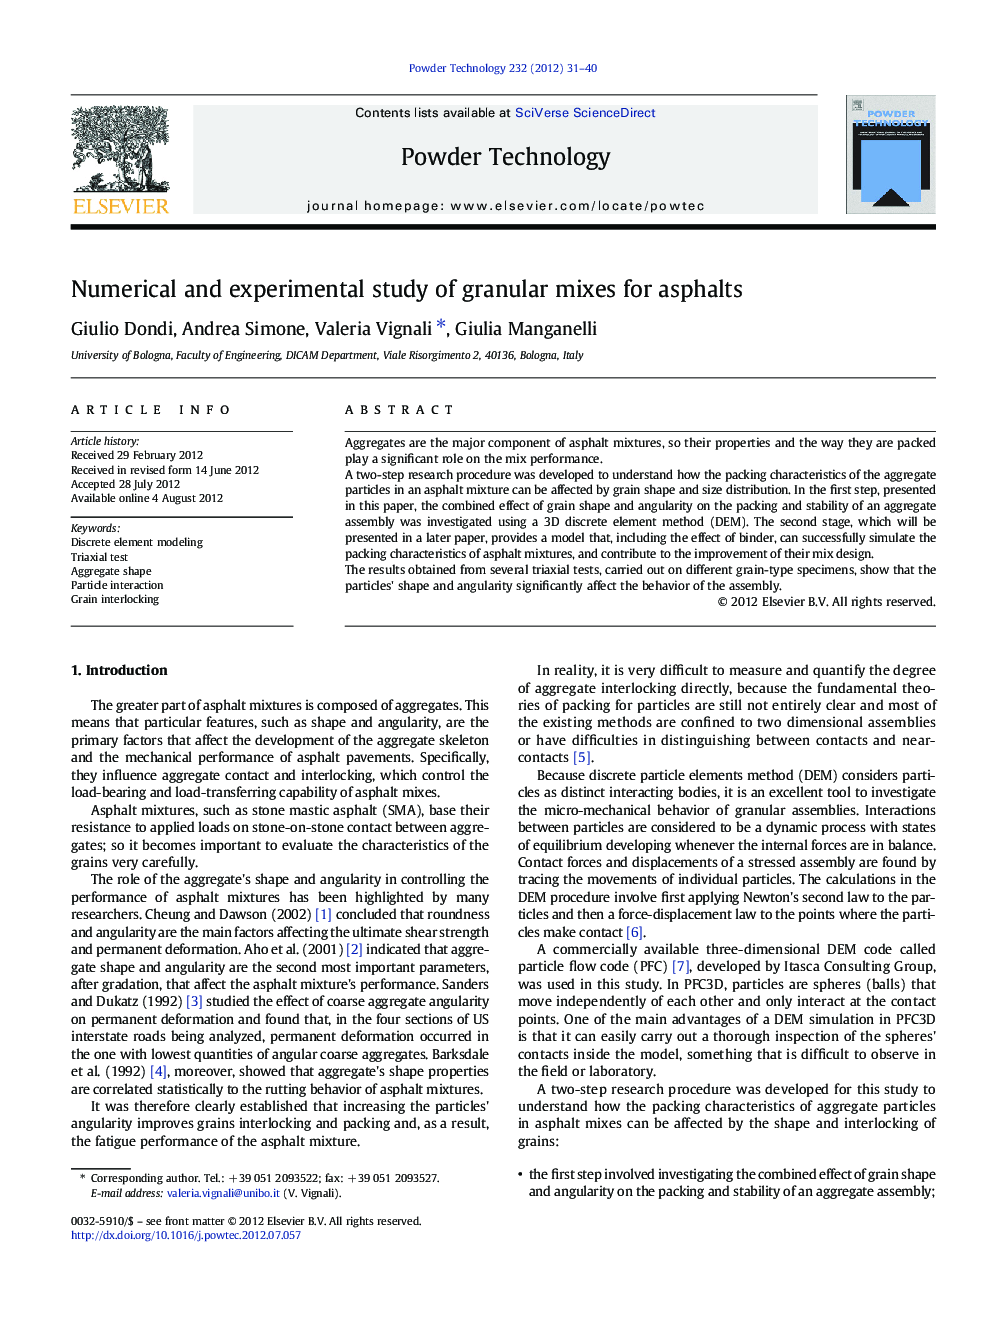 Numerical and experimental study of granular mixes for asphalts